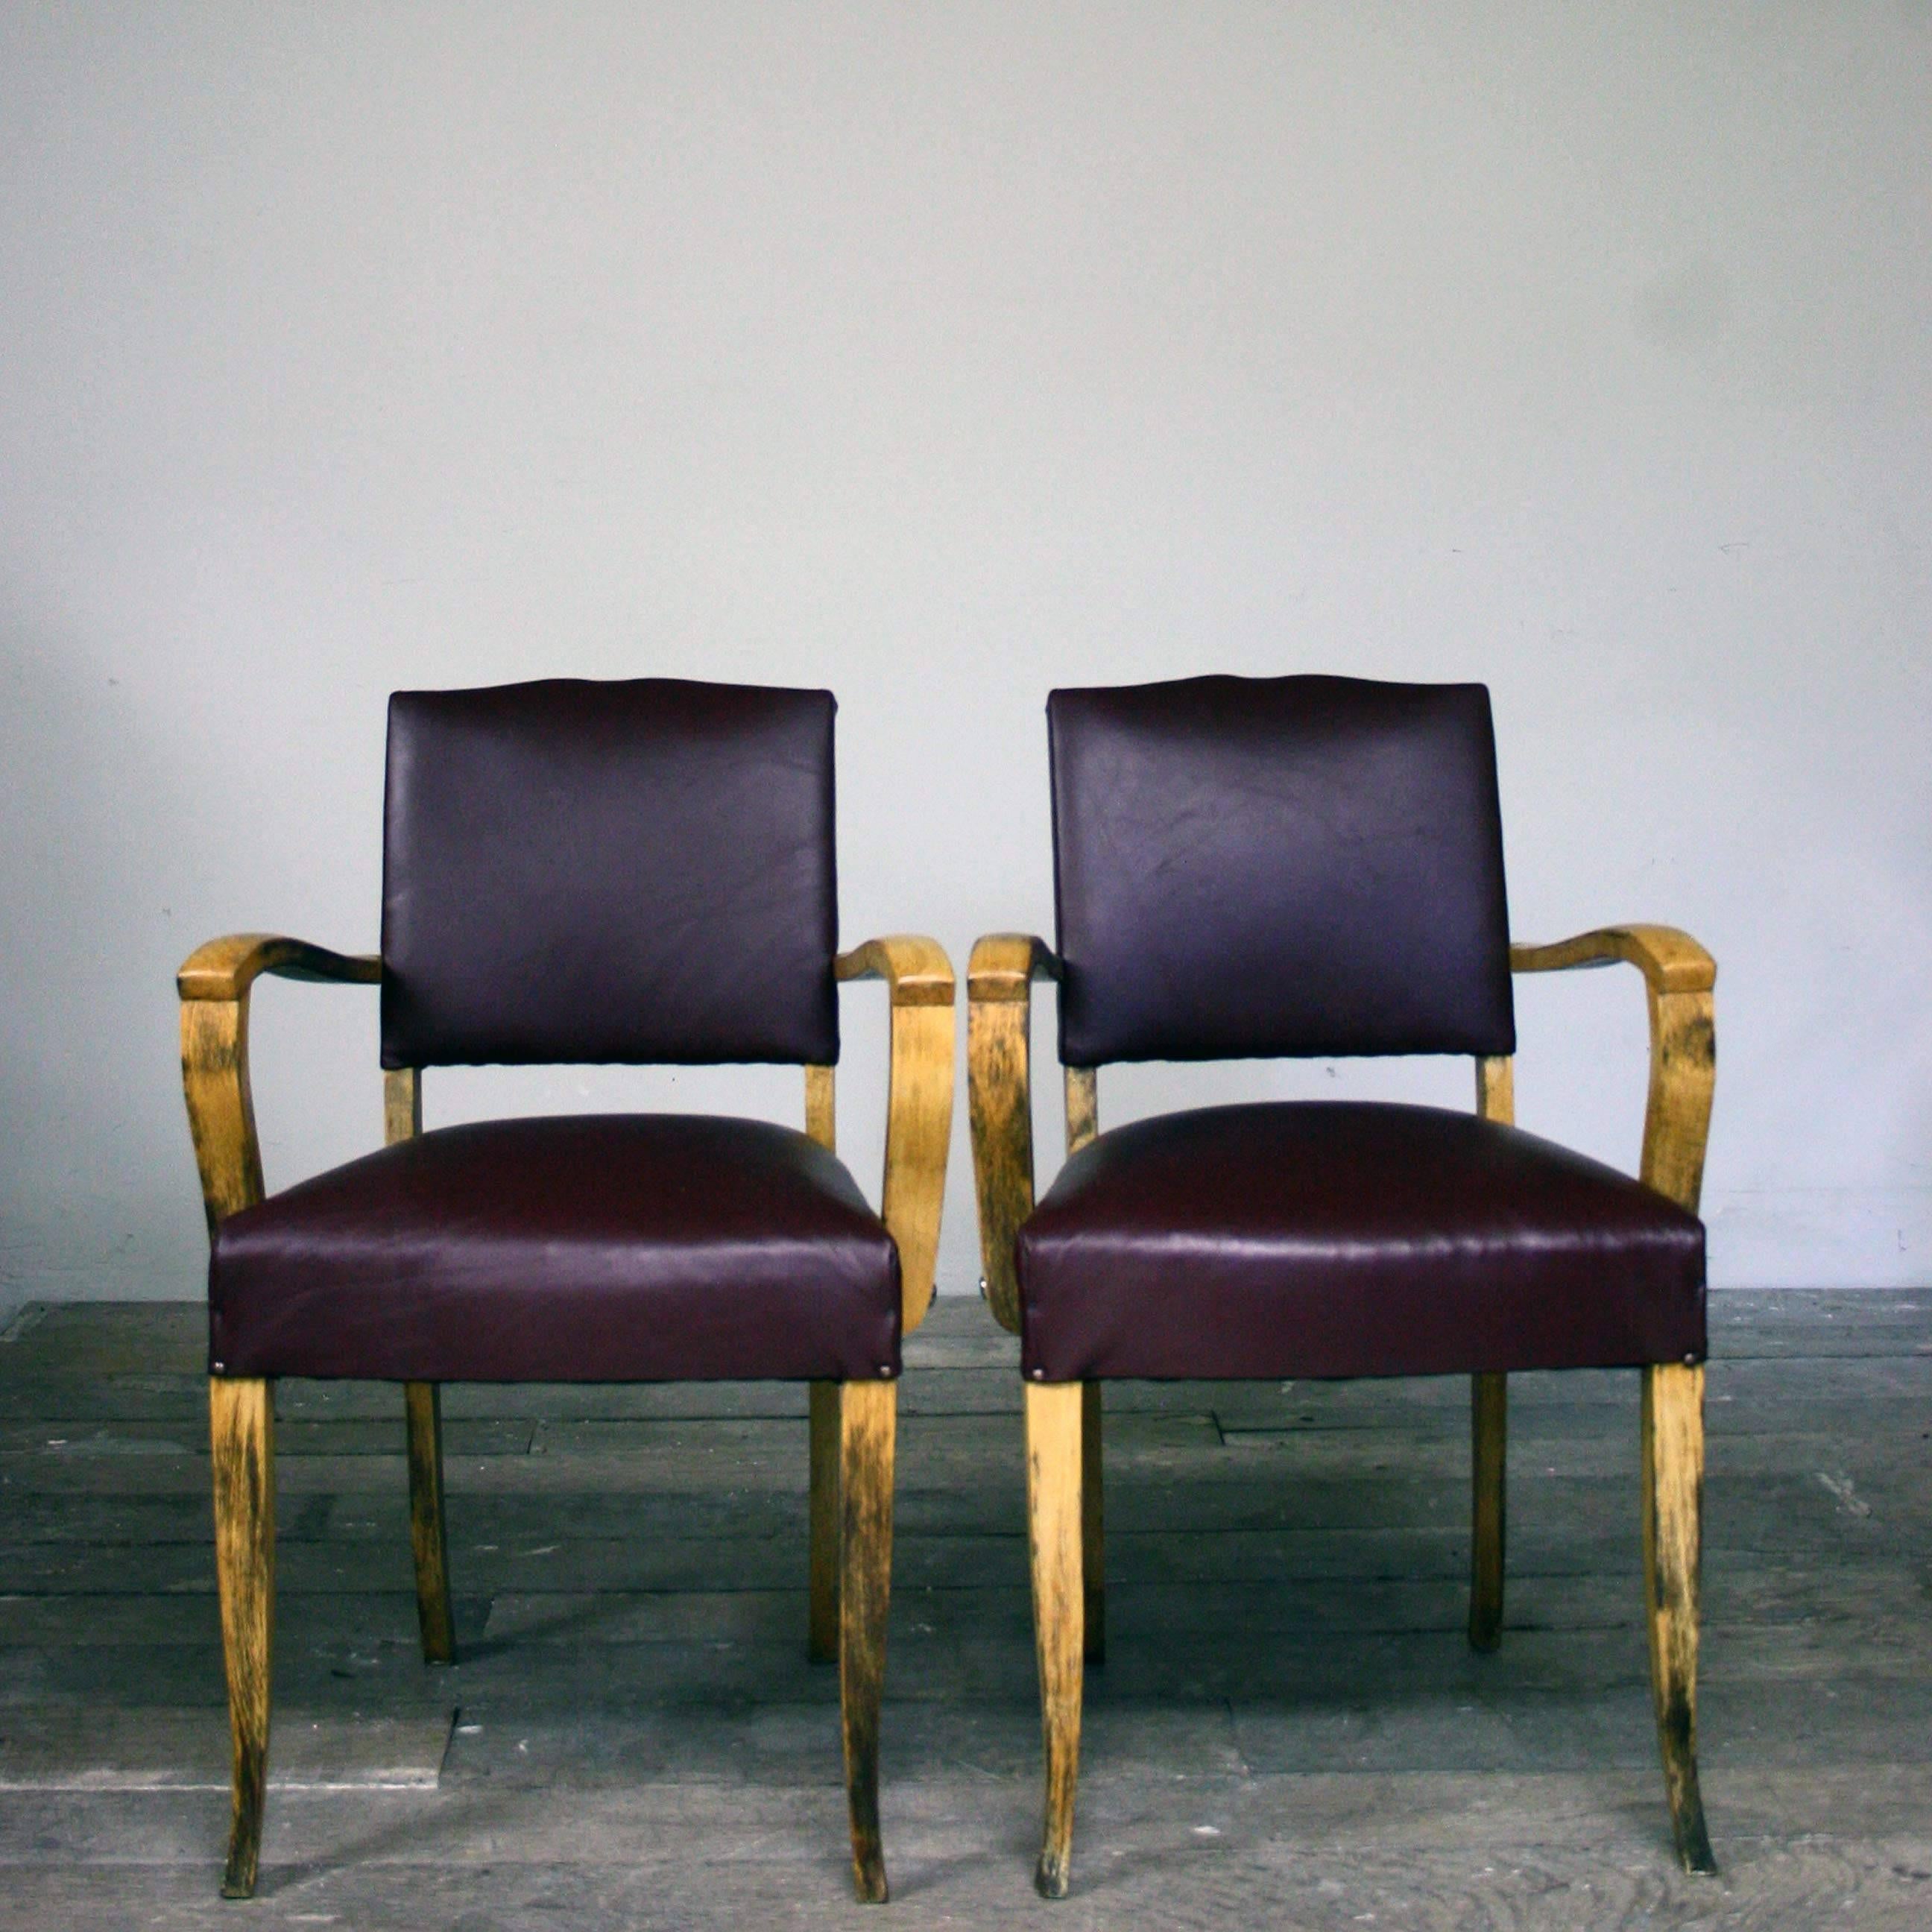 A pair of 1930s moustache back bridge chairs, that have been reupholstered in a Burgundy leather and black velvet back as the original material could not be saved. Very stylish, clean and tidy.

Additional dimensions: Armrest Height - 64.5cm
